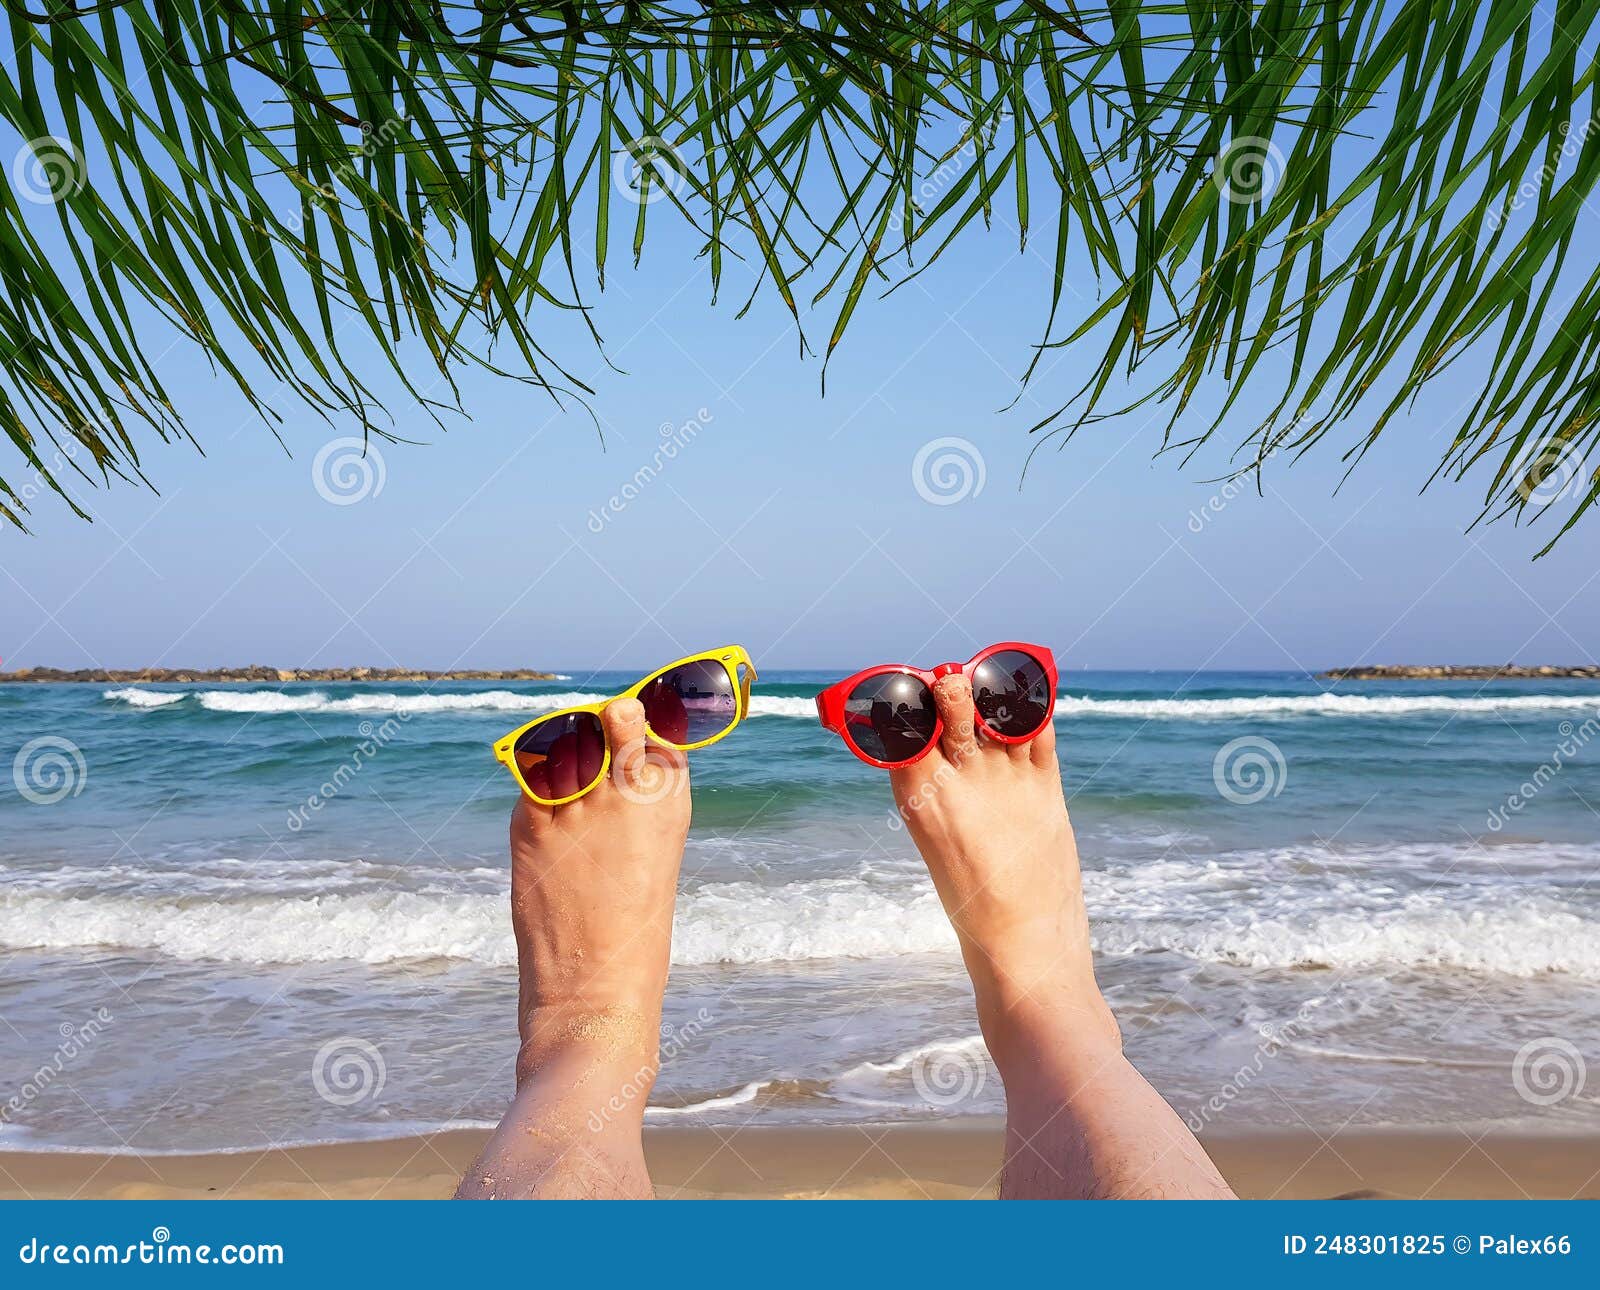 Summer Vacation. Funny Imagination Happy Character Stock Image - Image of  feet, happy: 248301825